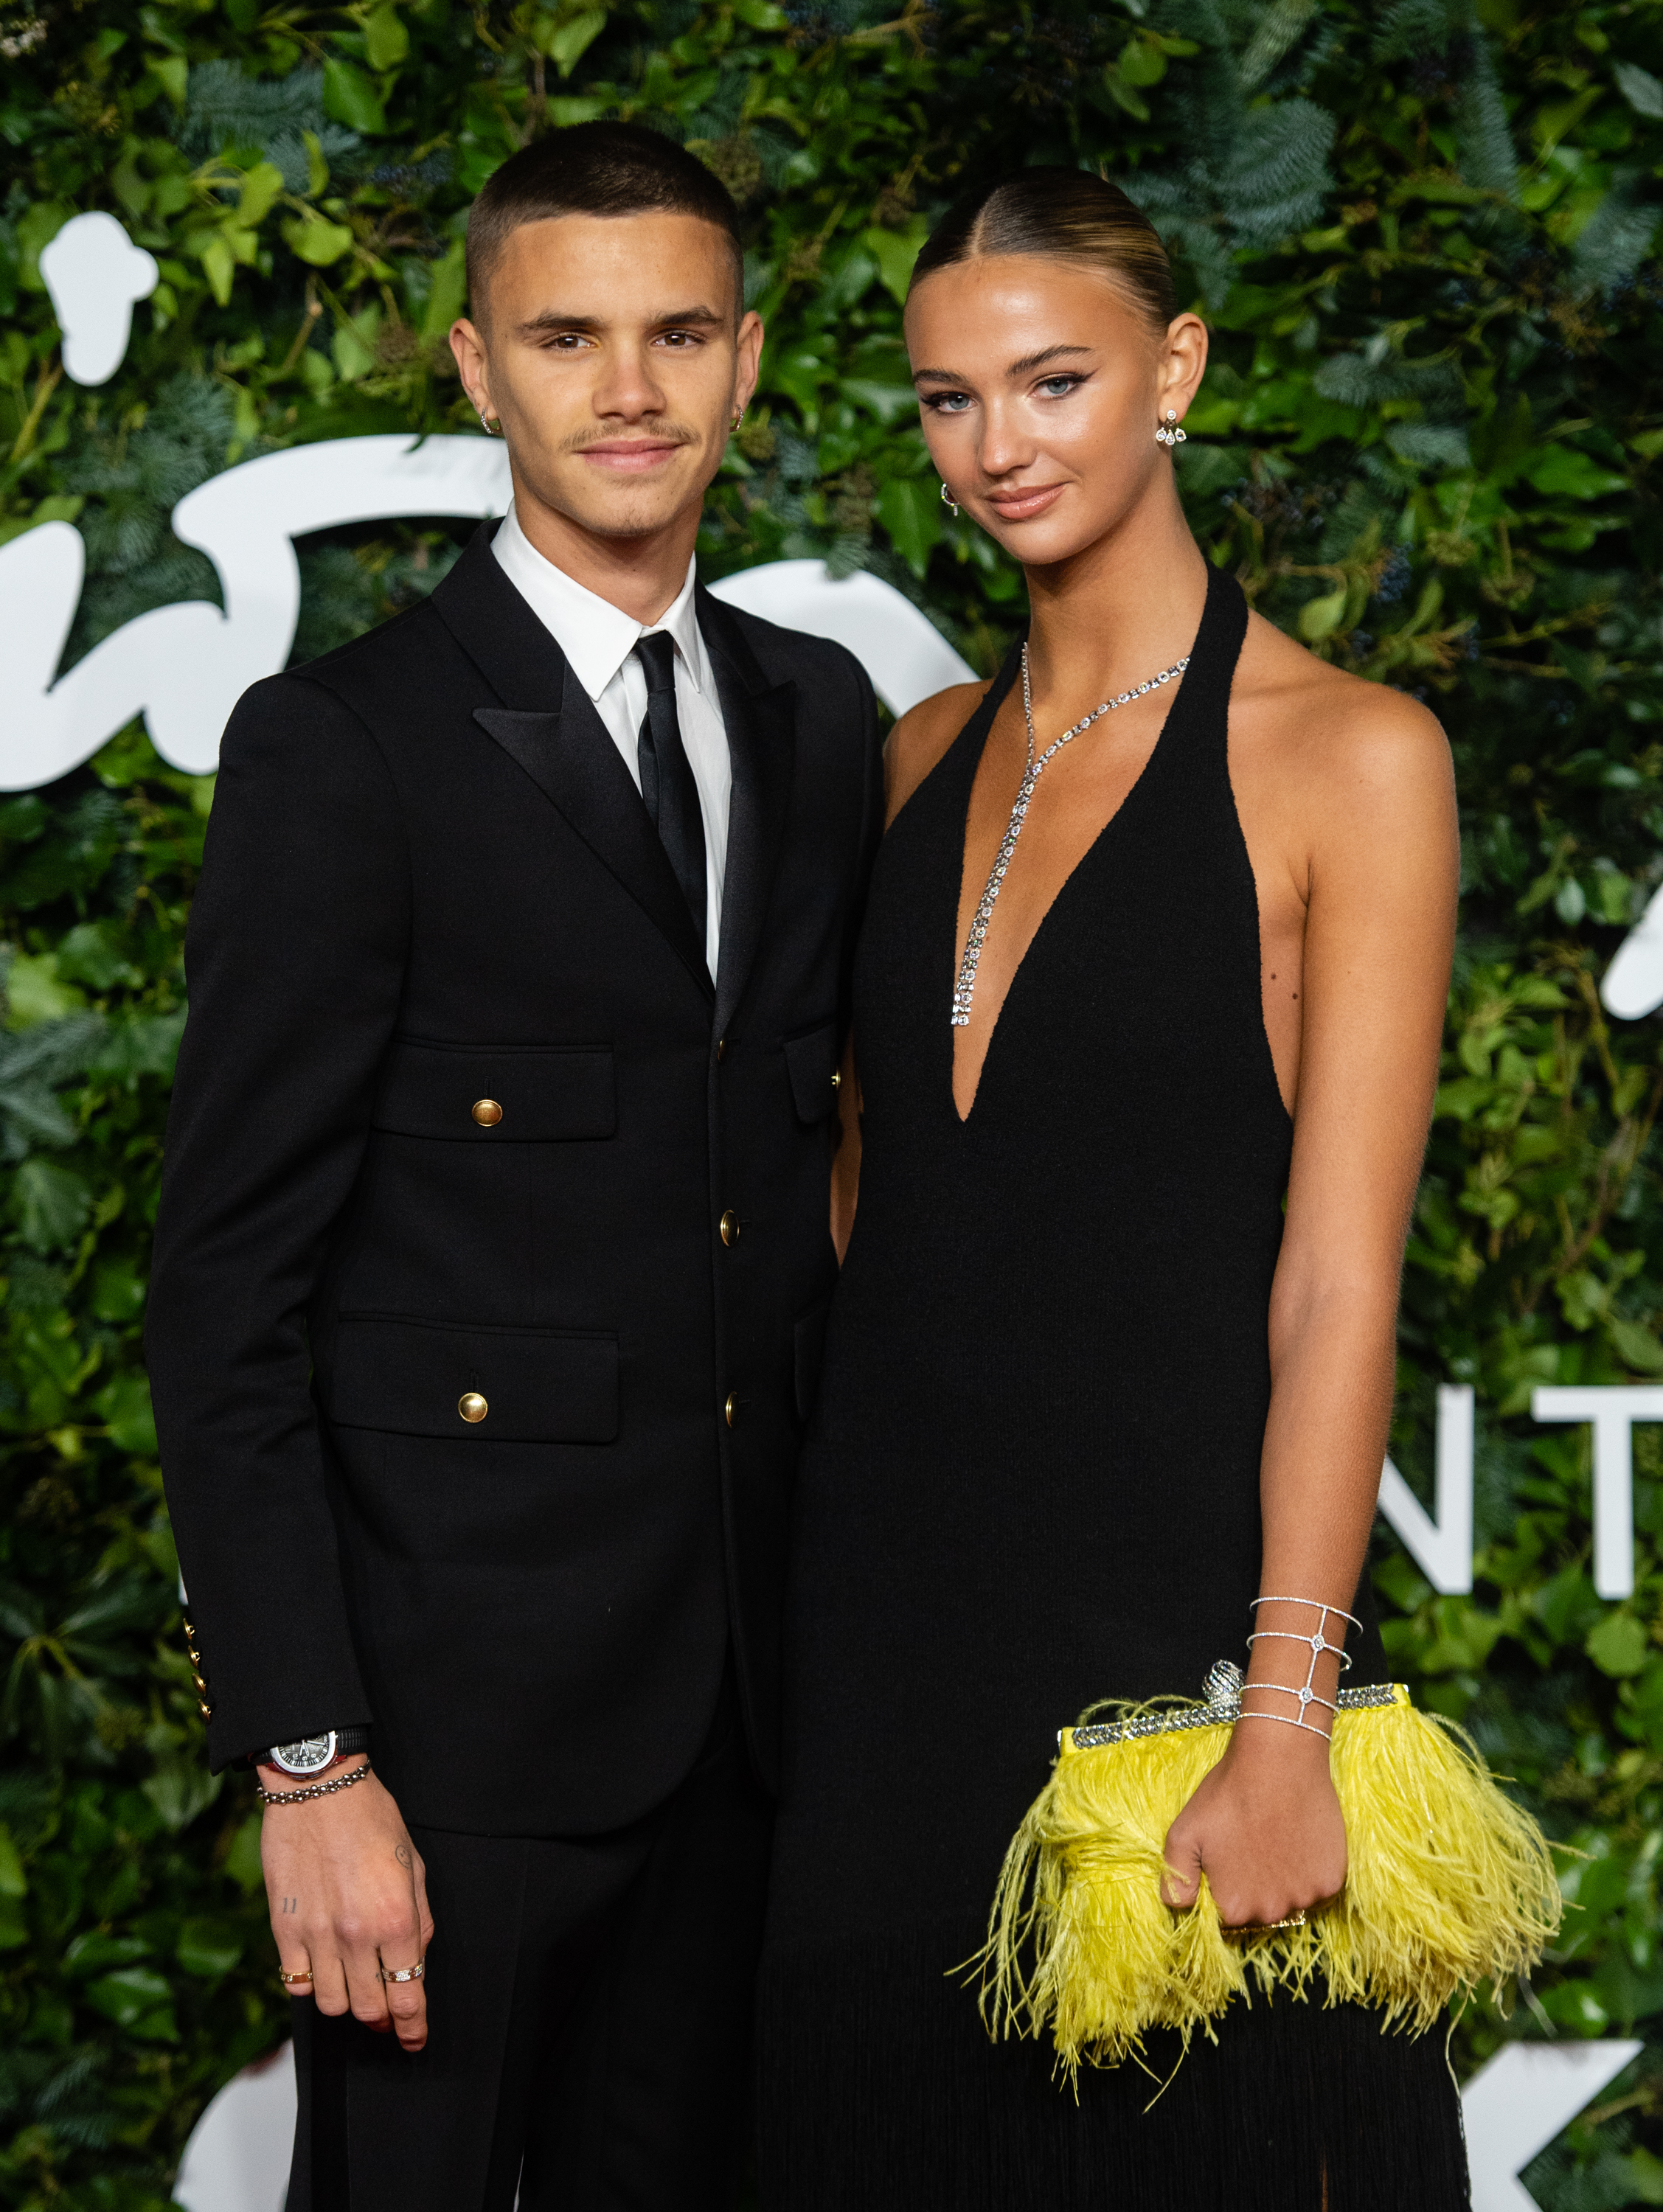 Romeo Beckham and Mia Regan at The British Fashion Awards in London, England, on November 29, 2021. | Source: Getty Images